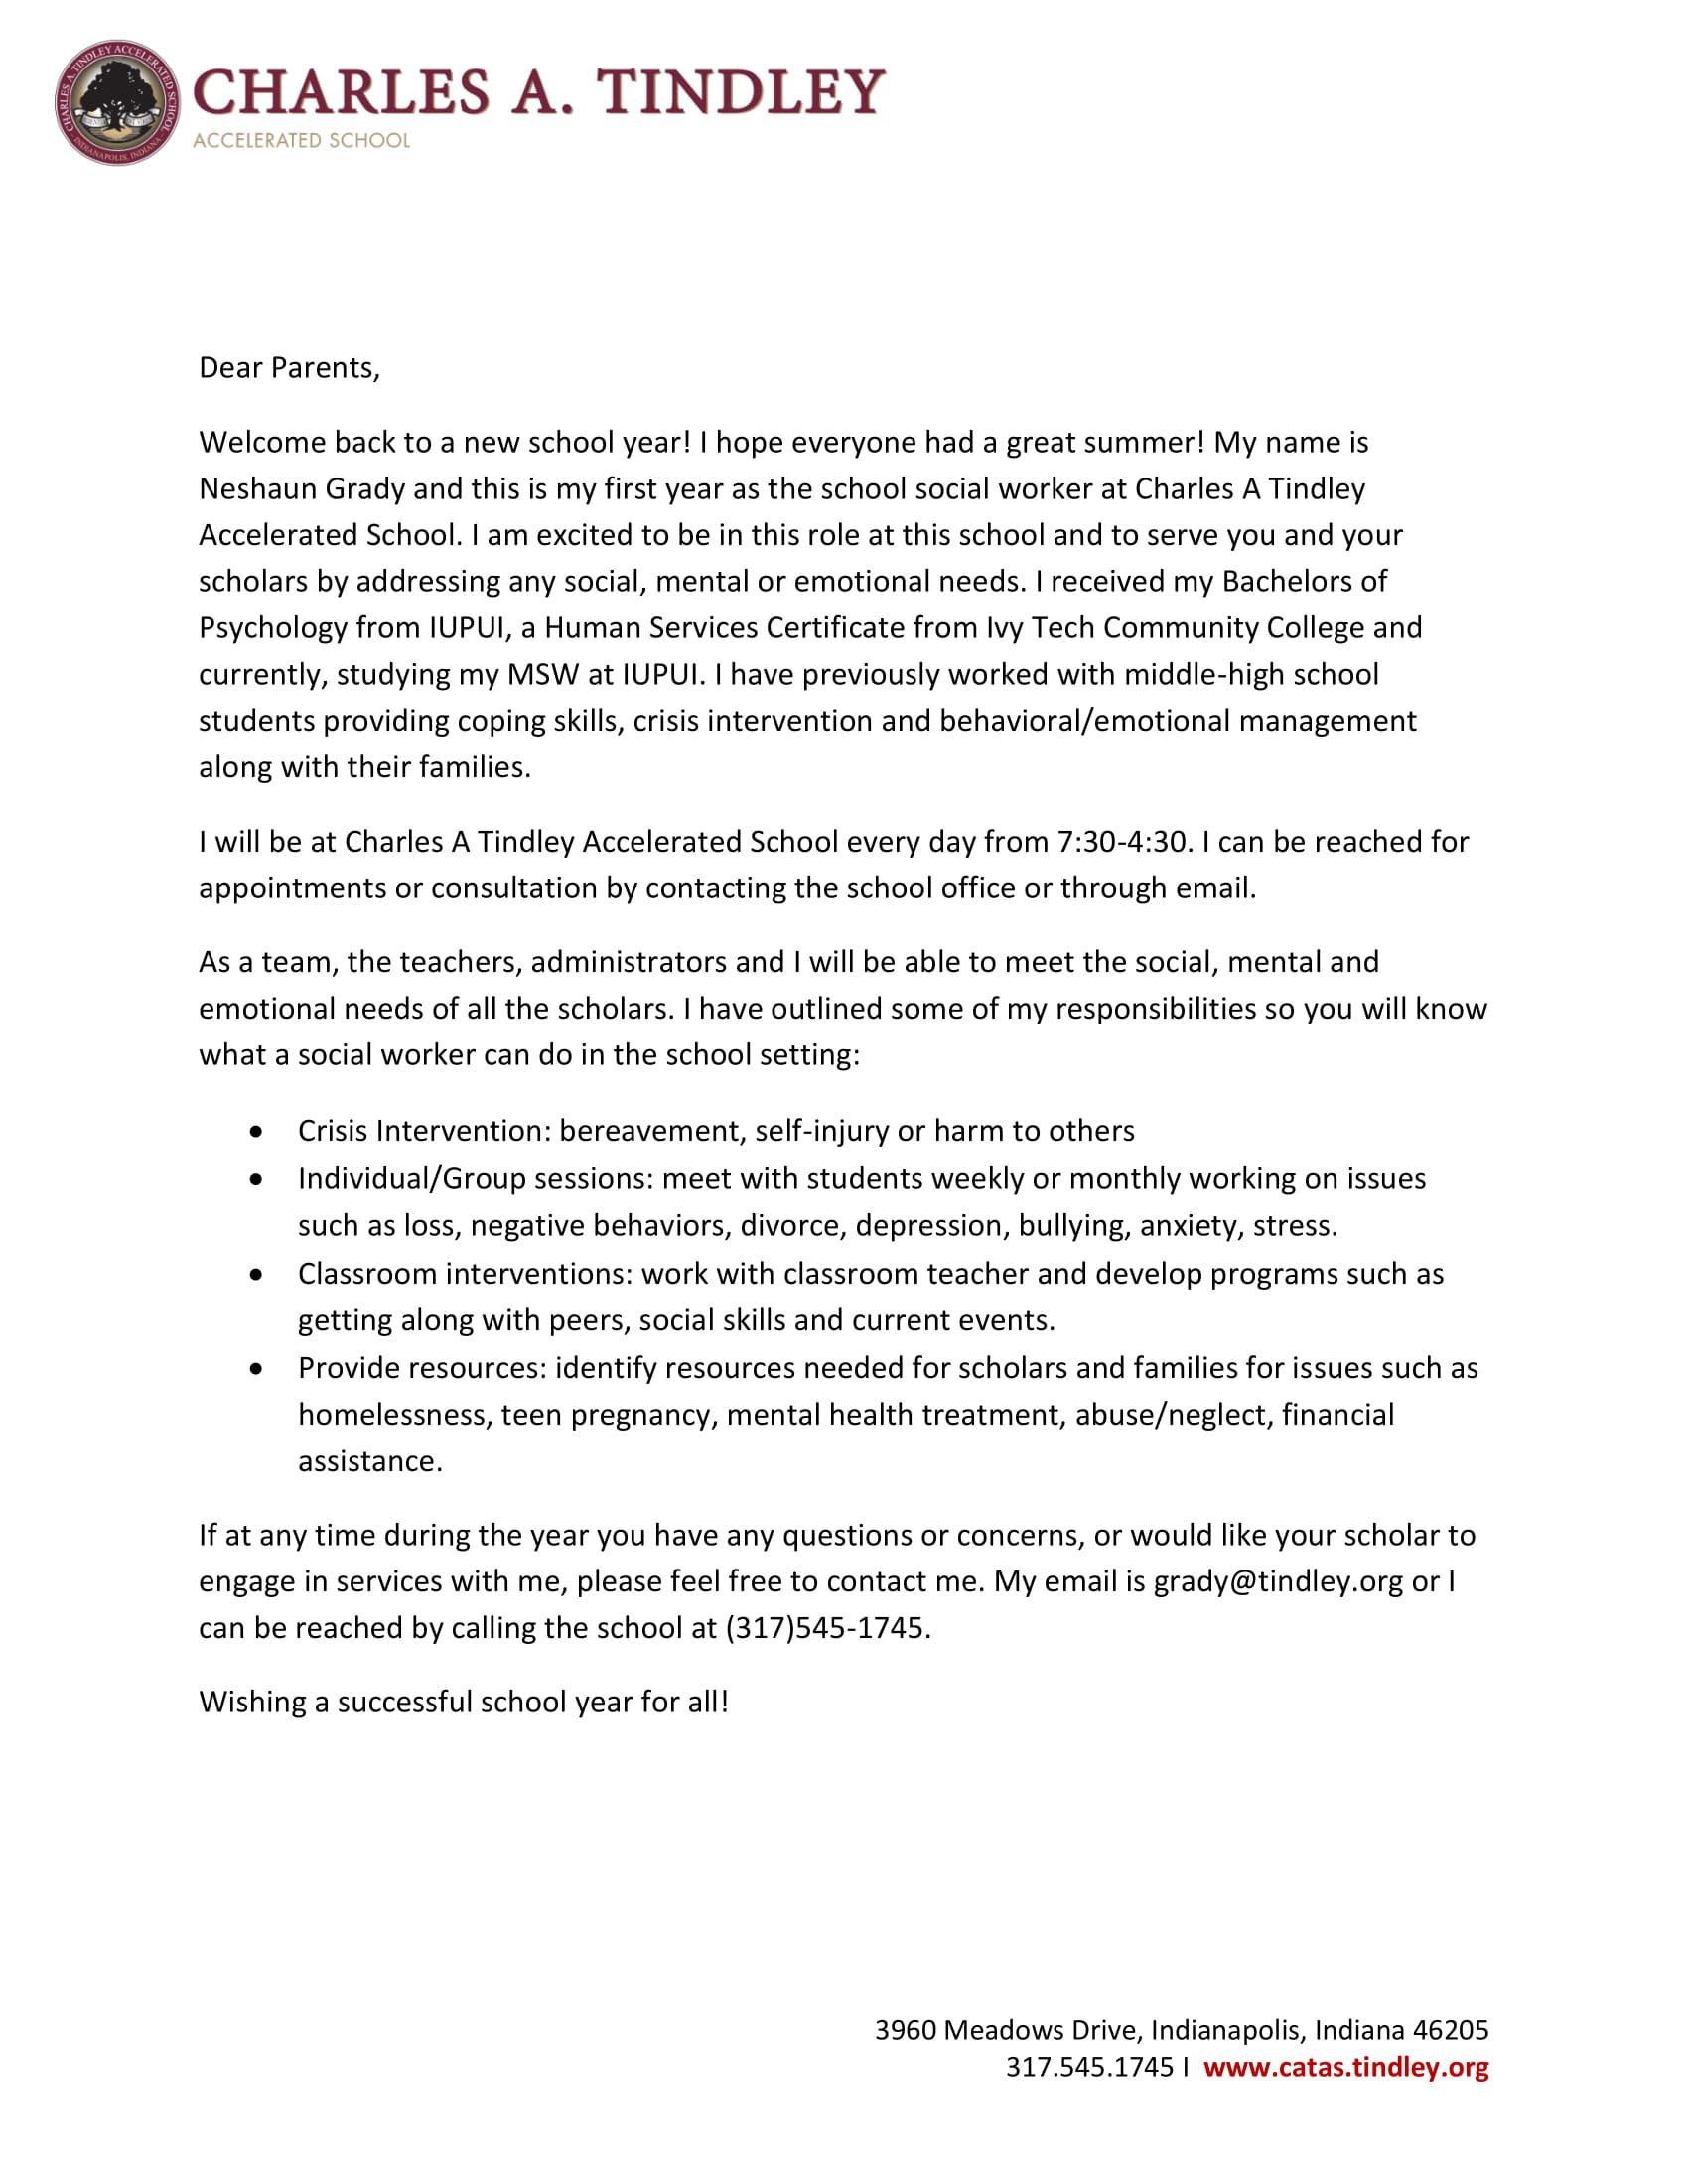 Social Worker letter to Parents